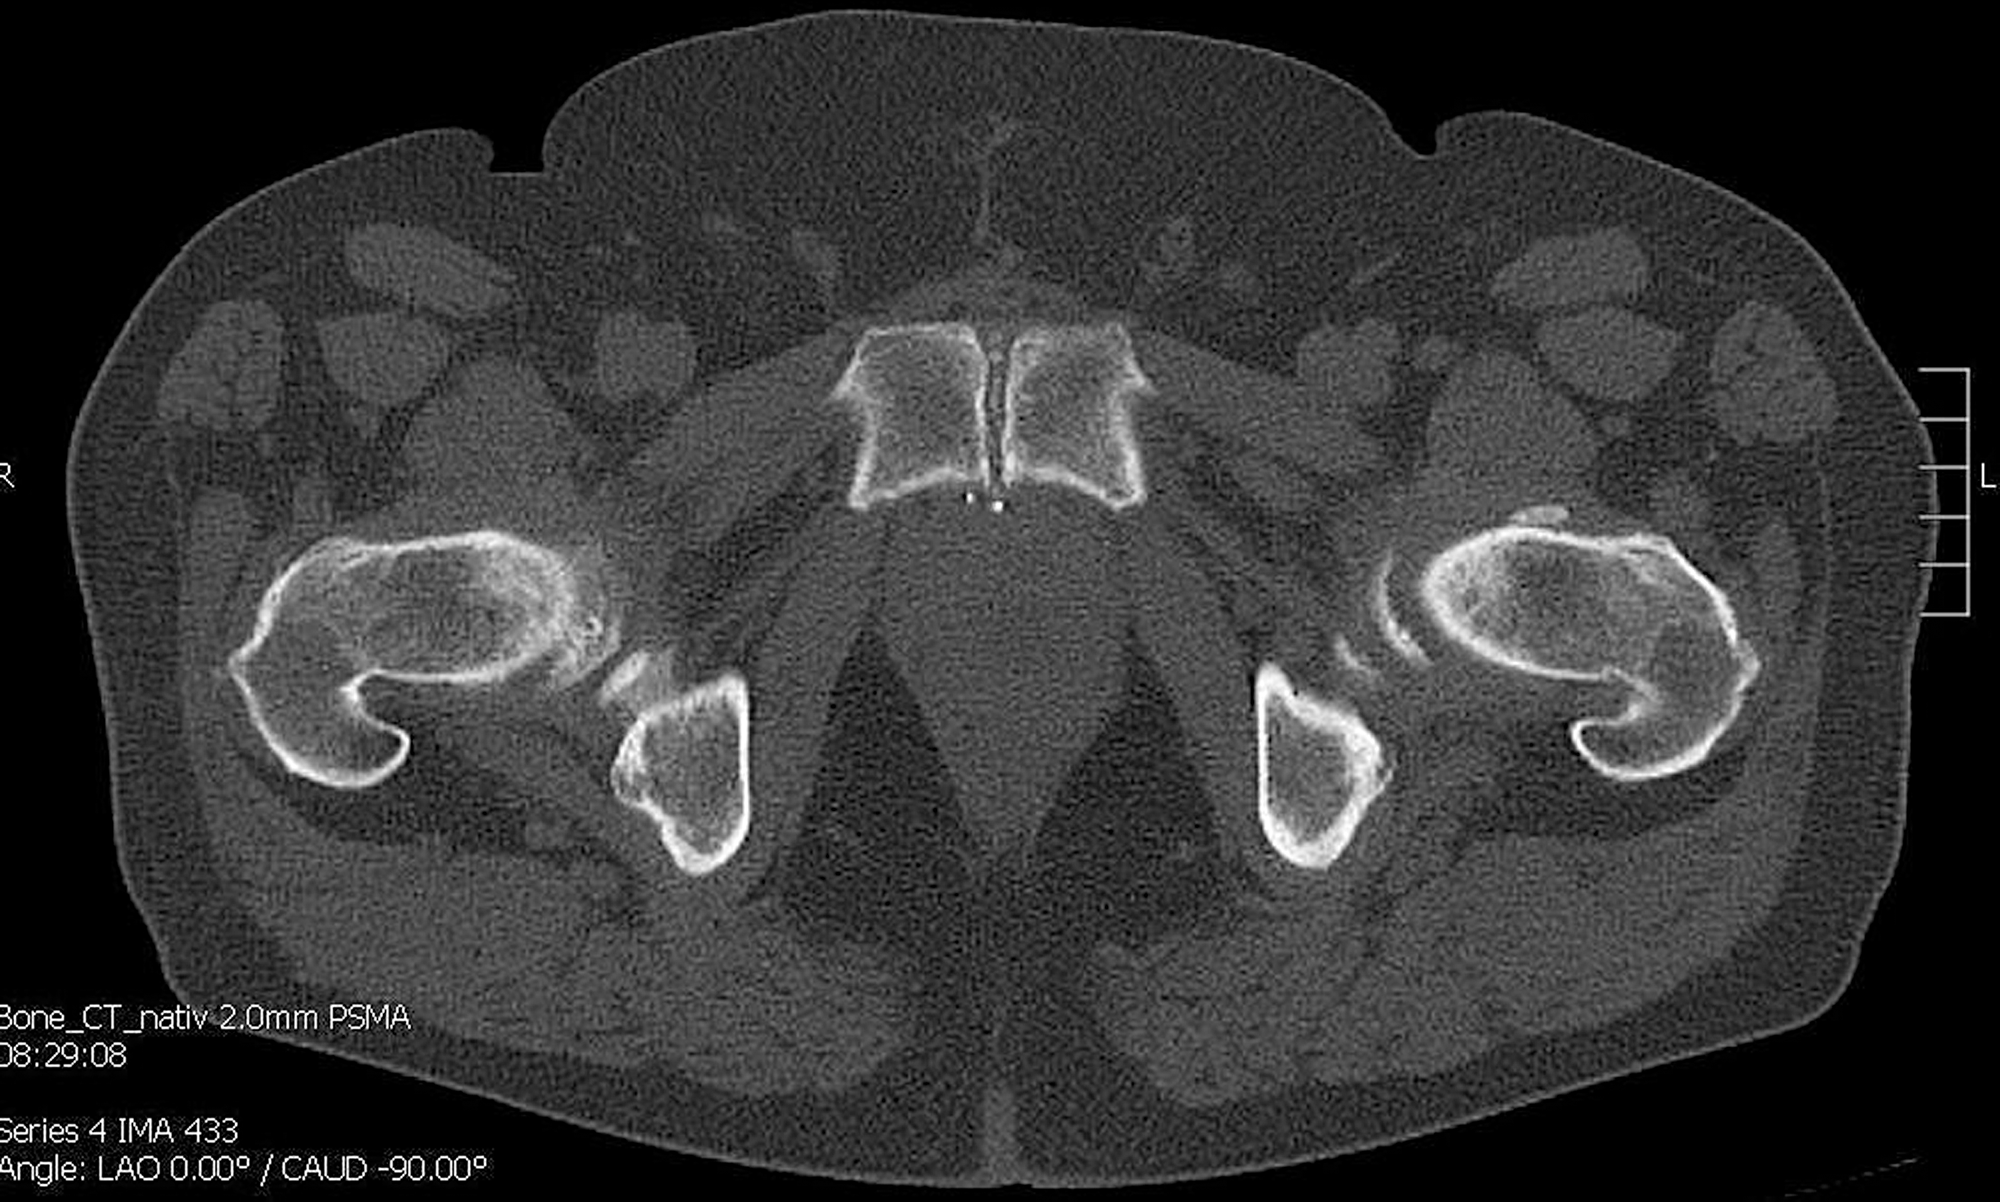 CT shows no bone metastasis in the symphyseal os pubis on the left.